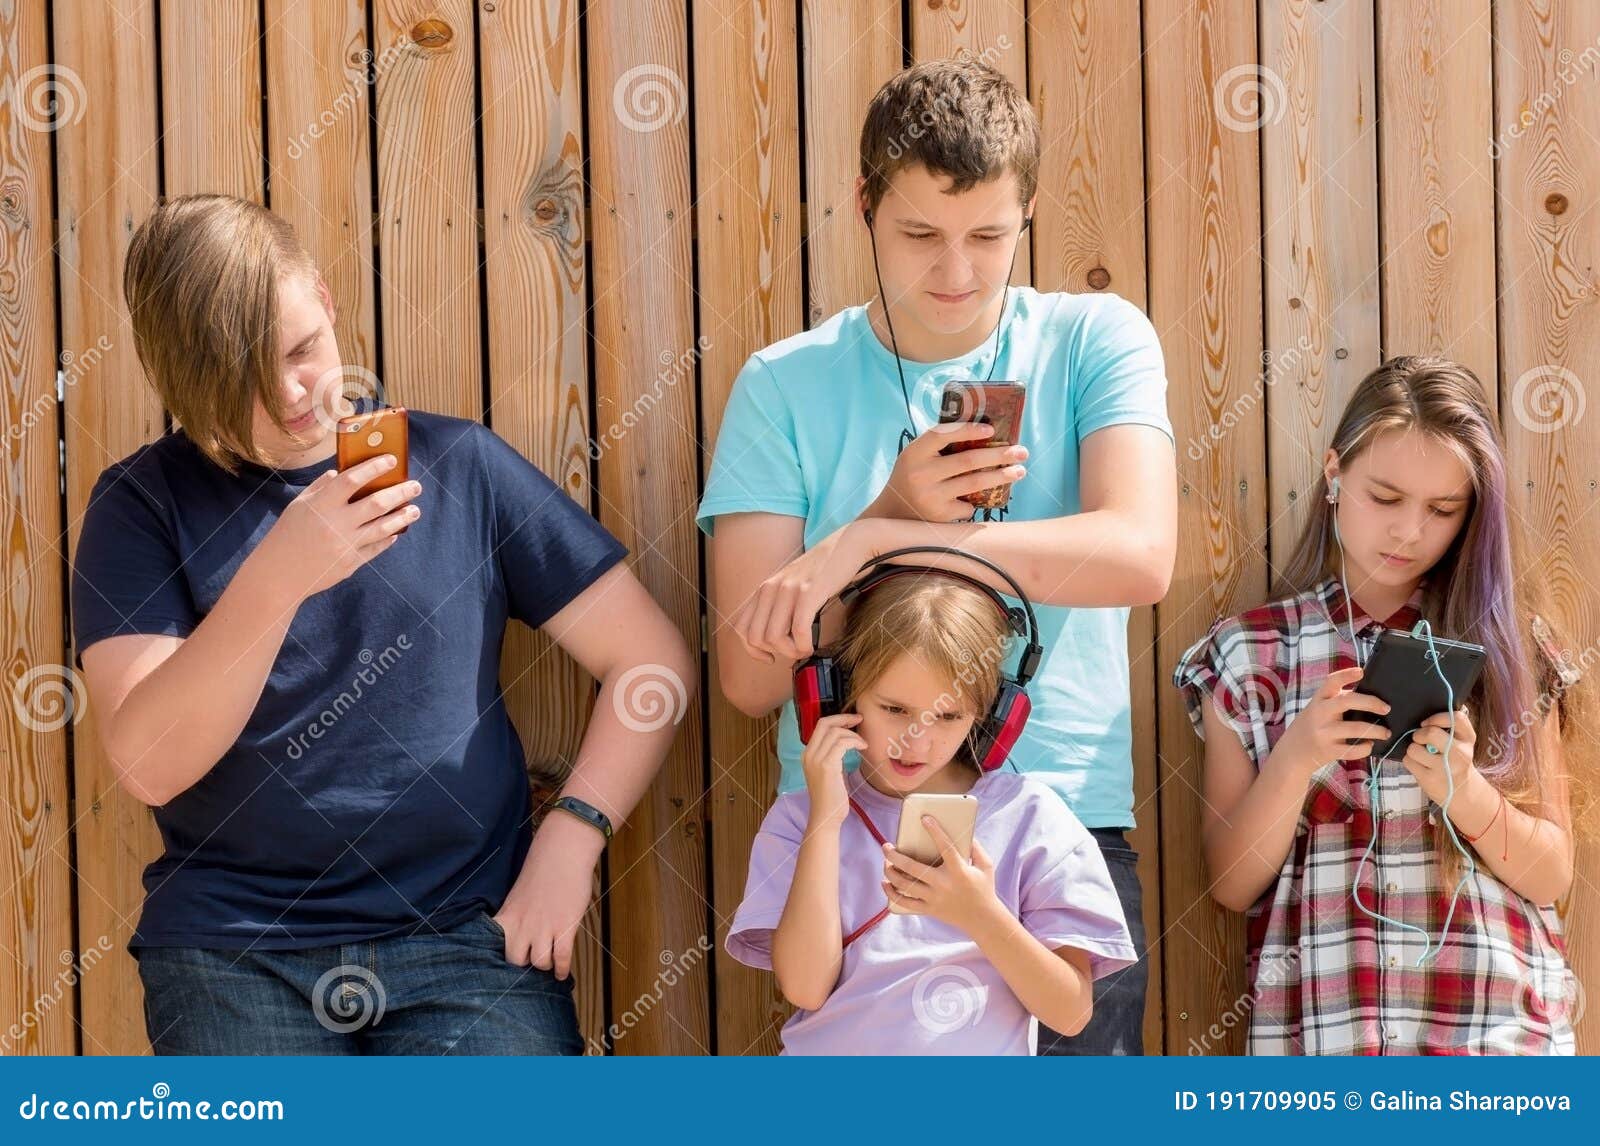 row of four friends using cellular phones. children and gadget concept.